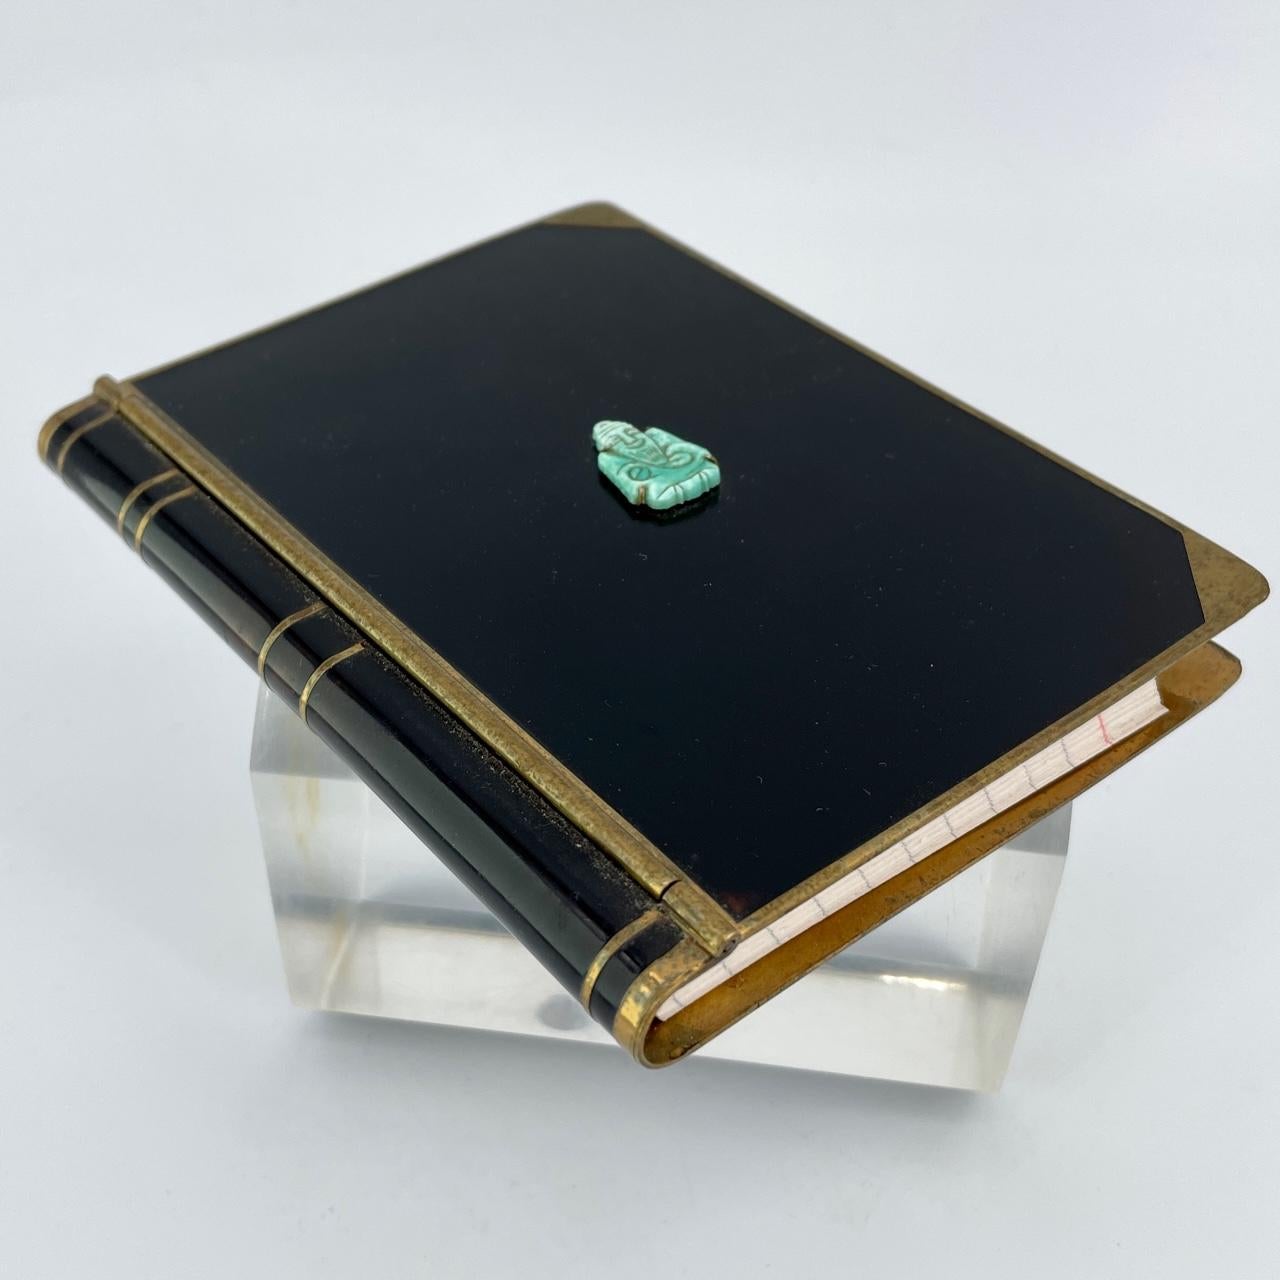 Purse note pad book, cinches paper in binding, works well with index cards, as shown. Carved Green Stone possibly Jade of a Confucius Asian Man with Long Beard.